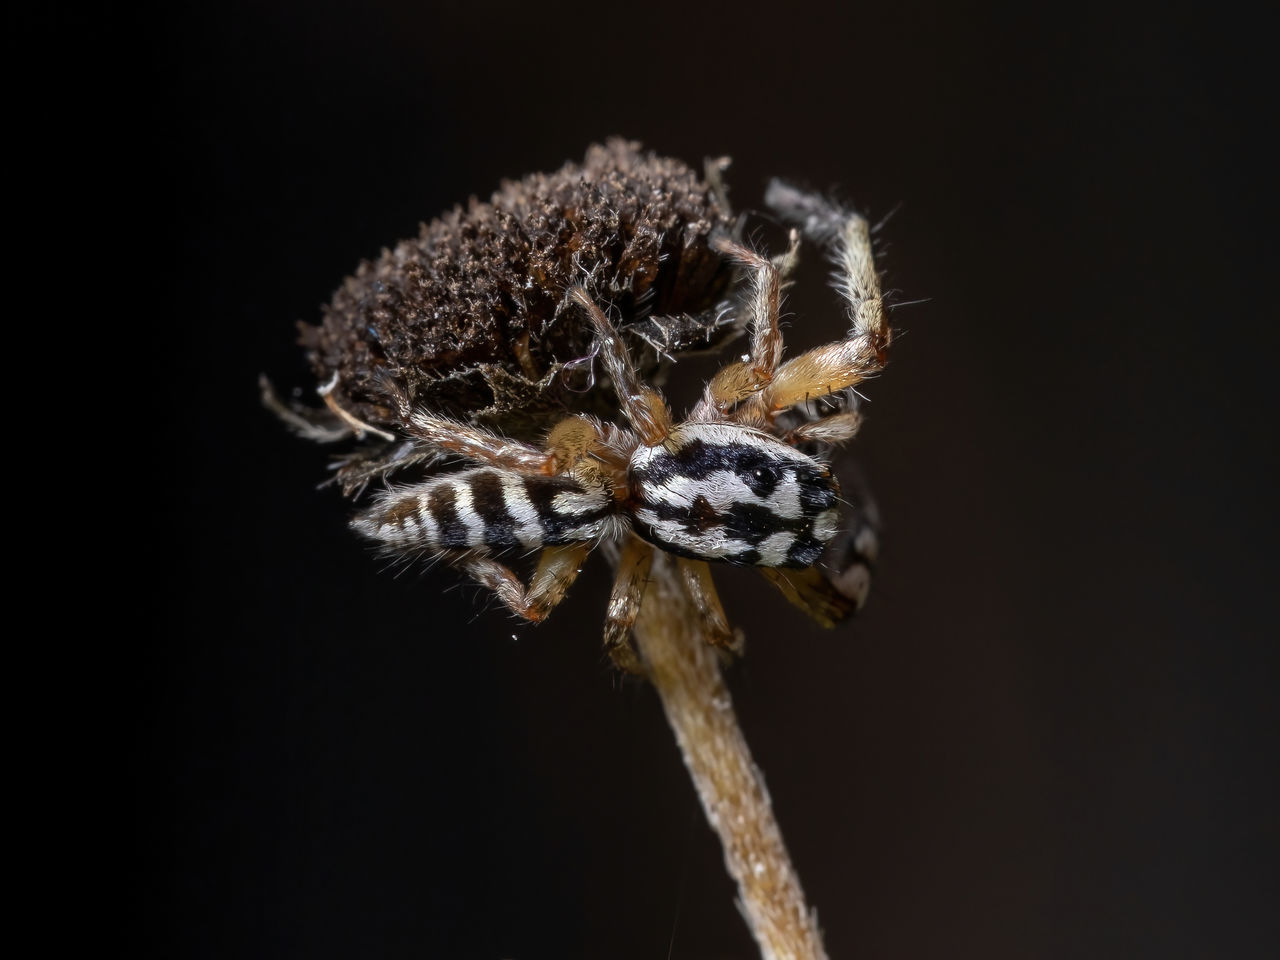 CLOSE-UP OF SPIDER ON FLOWER